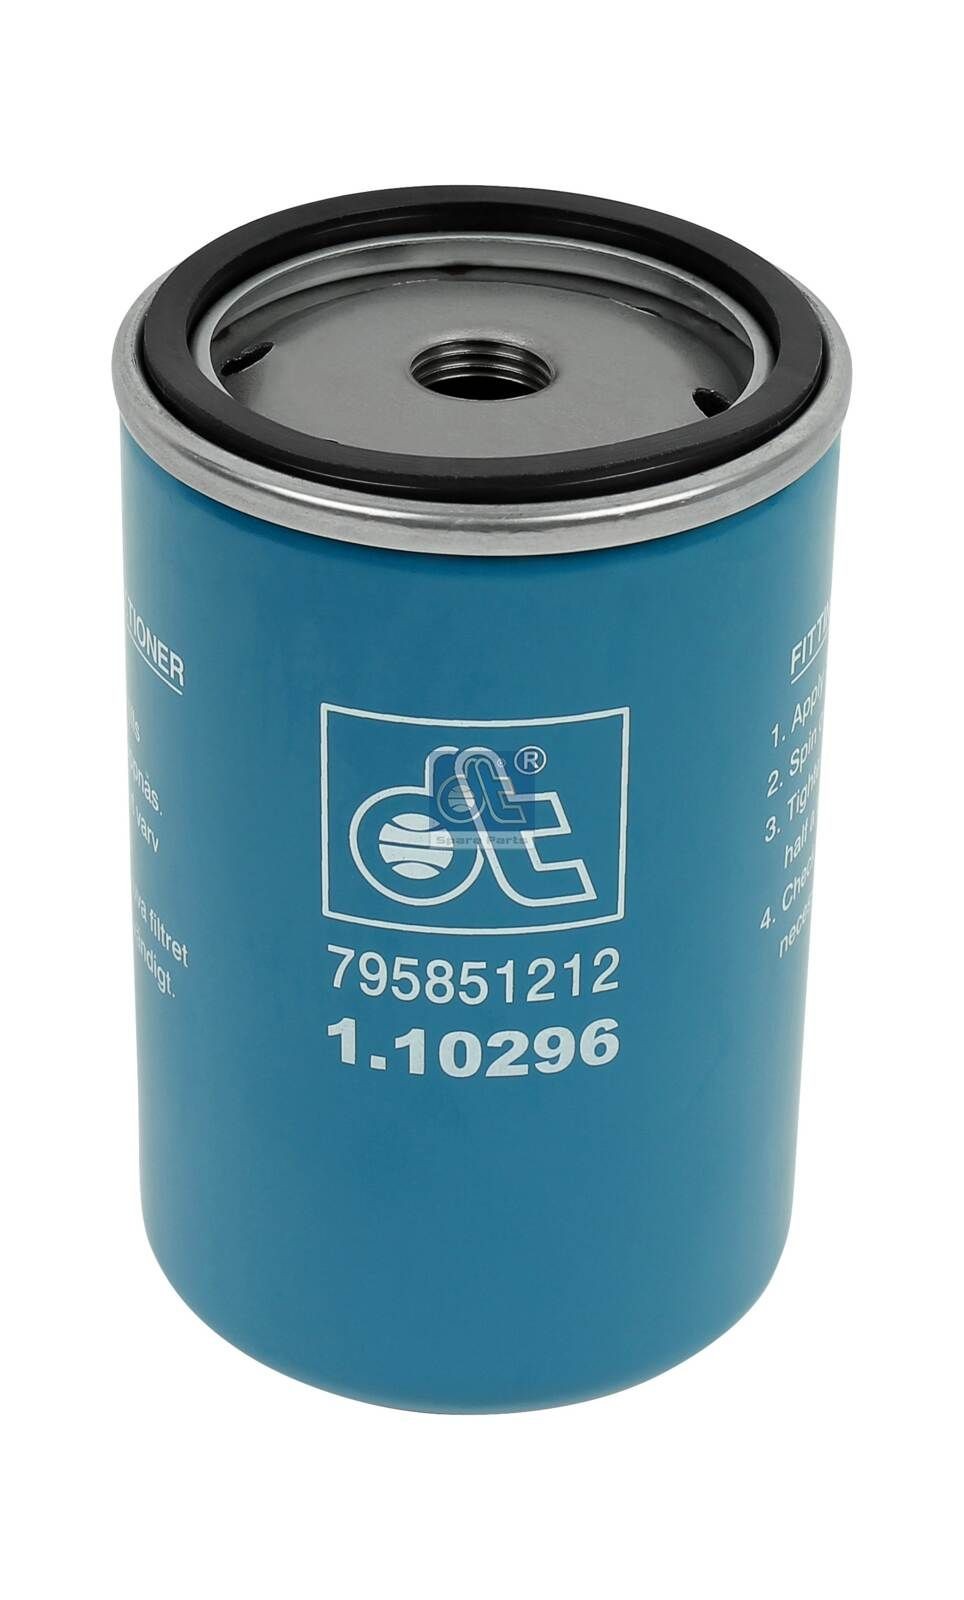 WK 723/1 DT Spare Parts 1.10296 Fuel filter 922 783